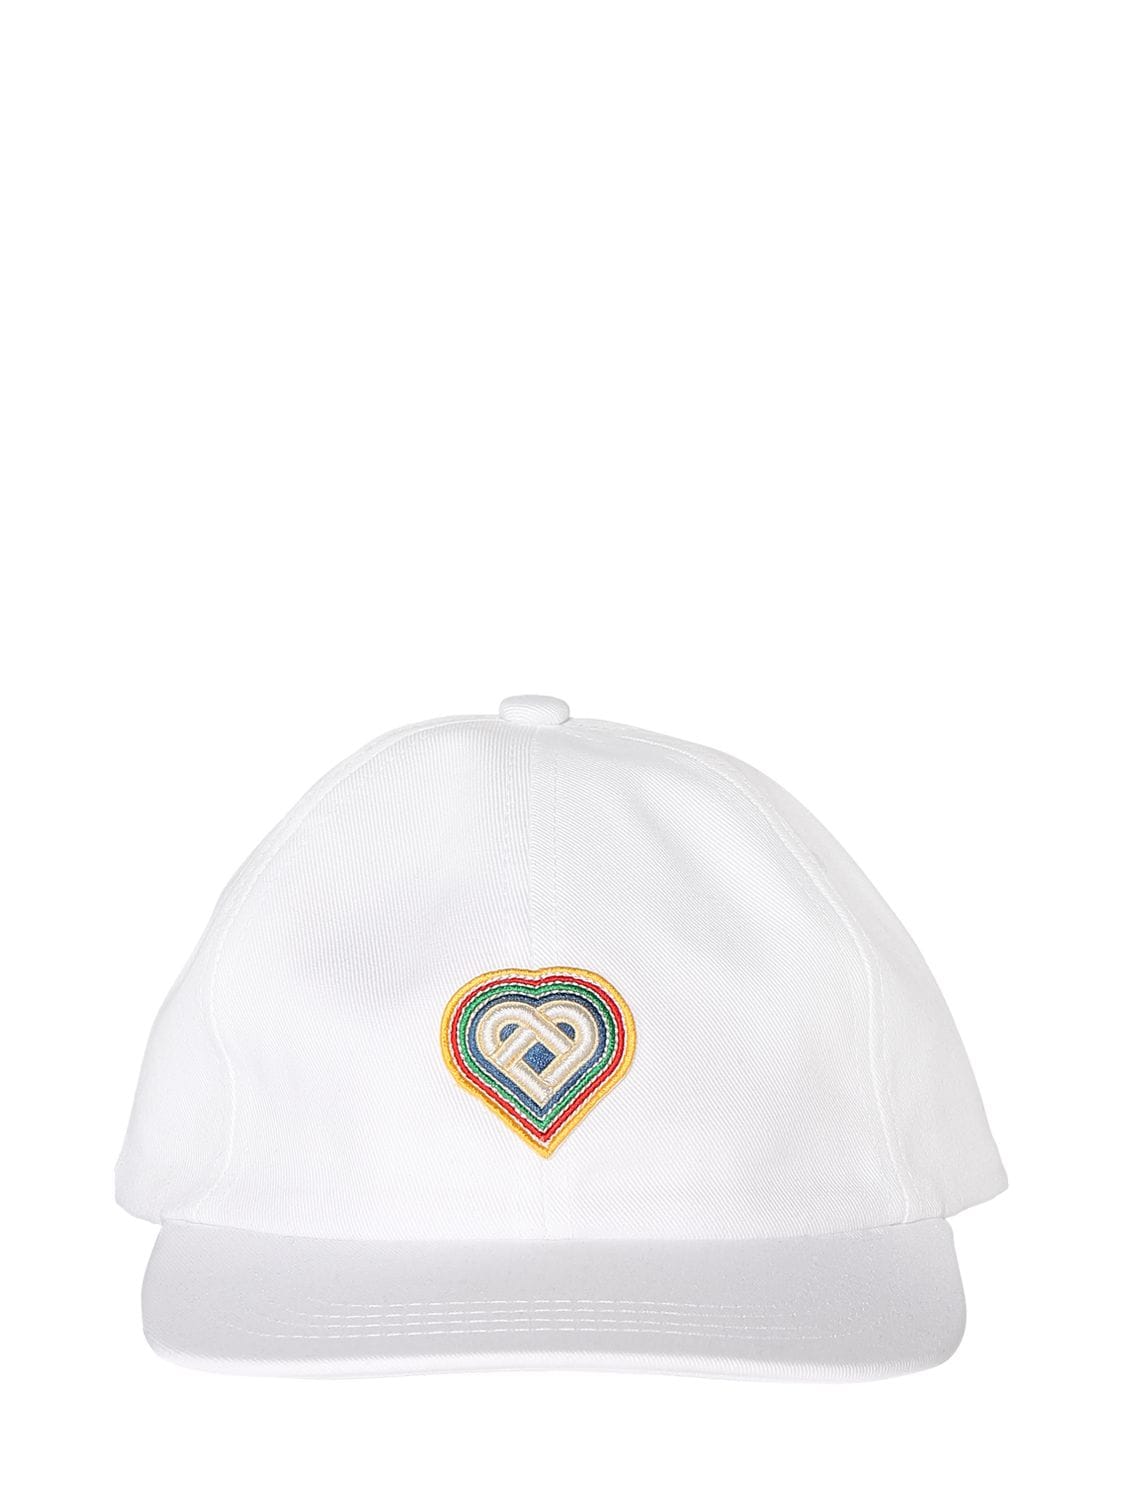 Image of Heart Embroidered Baseball Cap